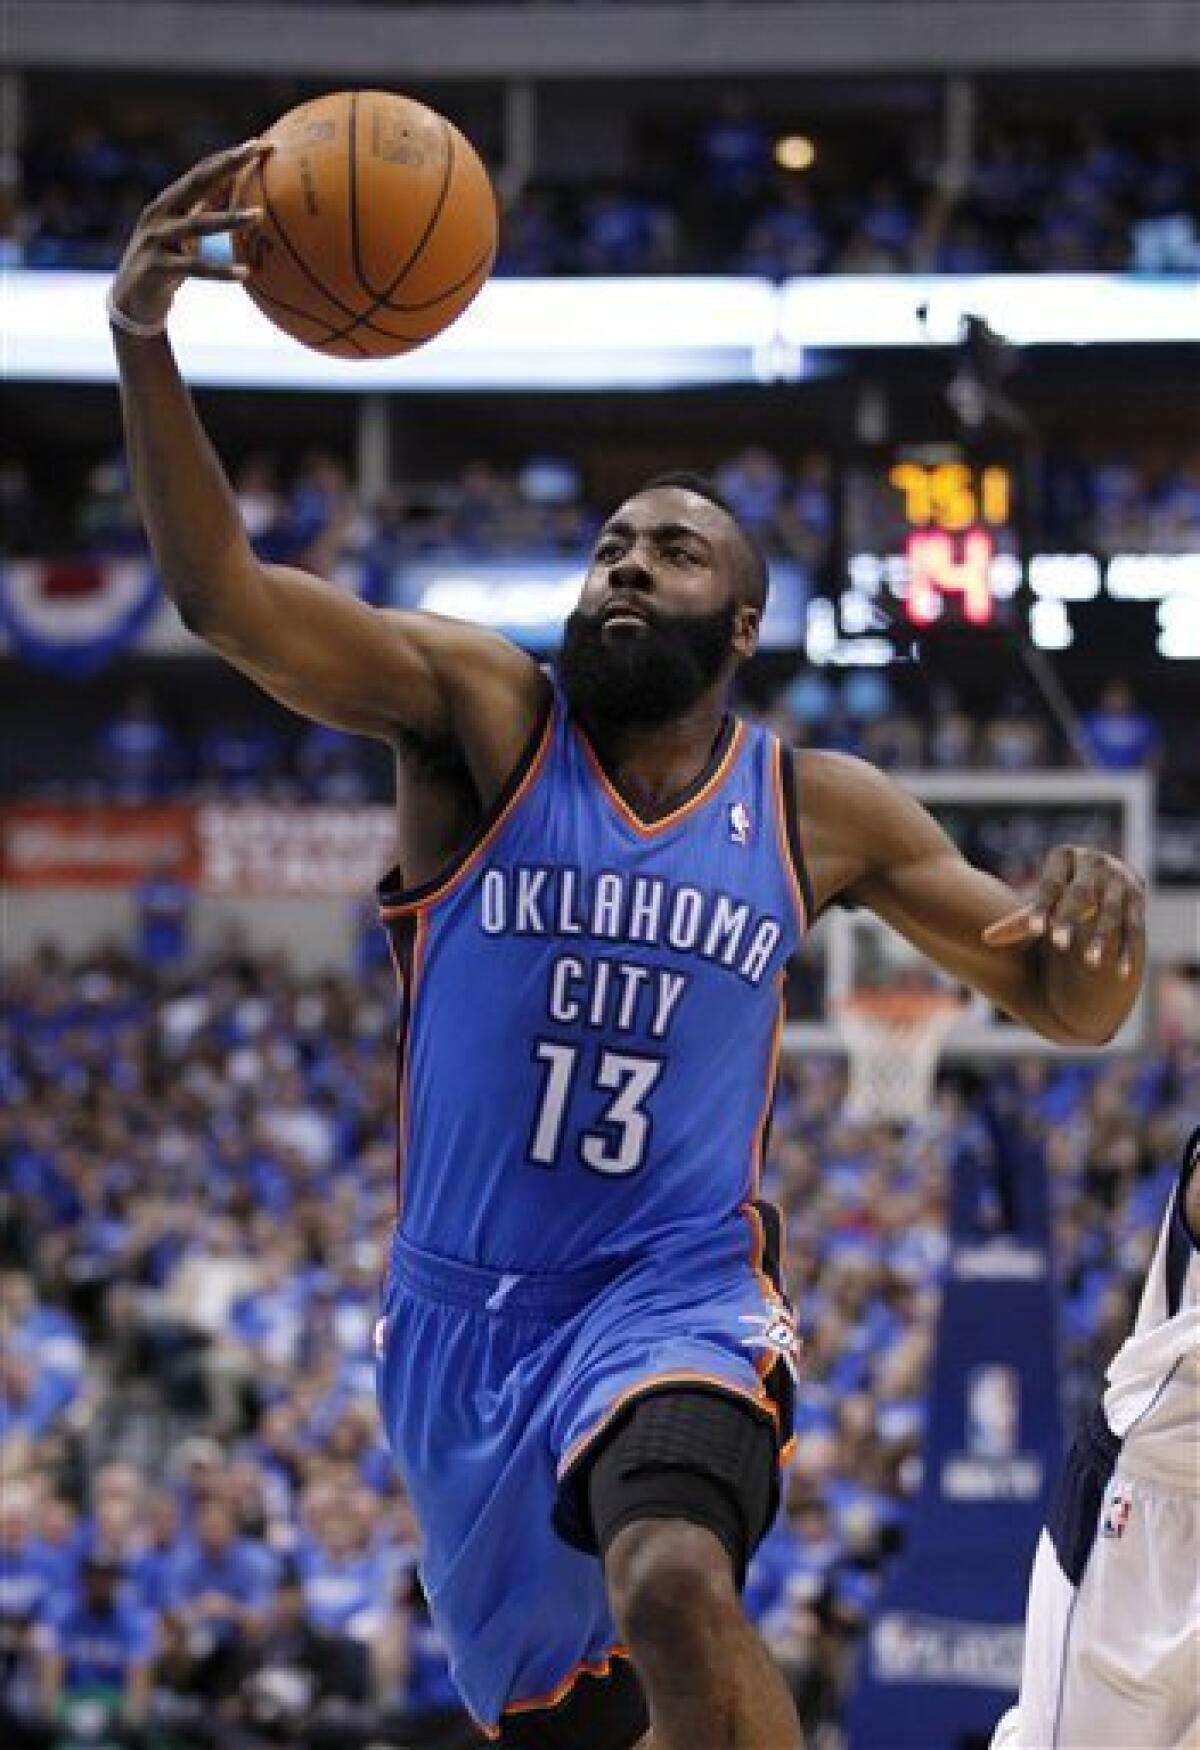 In this May 3, 2012 photo, Oklahoma City Thunder's James Harden (13) grabs a loose ball against the Dallas Mavericks during Game 3 in the first round of the NBA basketball playoffs in Dallas. The Thunder have traded Sixth Man of the Year Harden to the Houston Rockets, breaking up the young core of the Western Conference champions. The Thunder acquired guards Kevin Martin and Jeremy Lamb, two first-round picks and a second-round pick in the surprising deal that was completed Saturday night, Oct. 27, 2012. Oklahoma City also sent center Cole Aldrich, and forwards Daequan Cook and Lazar Hayward to Houston. (AP Photo/Tony Gutierrez)